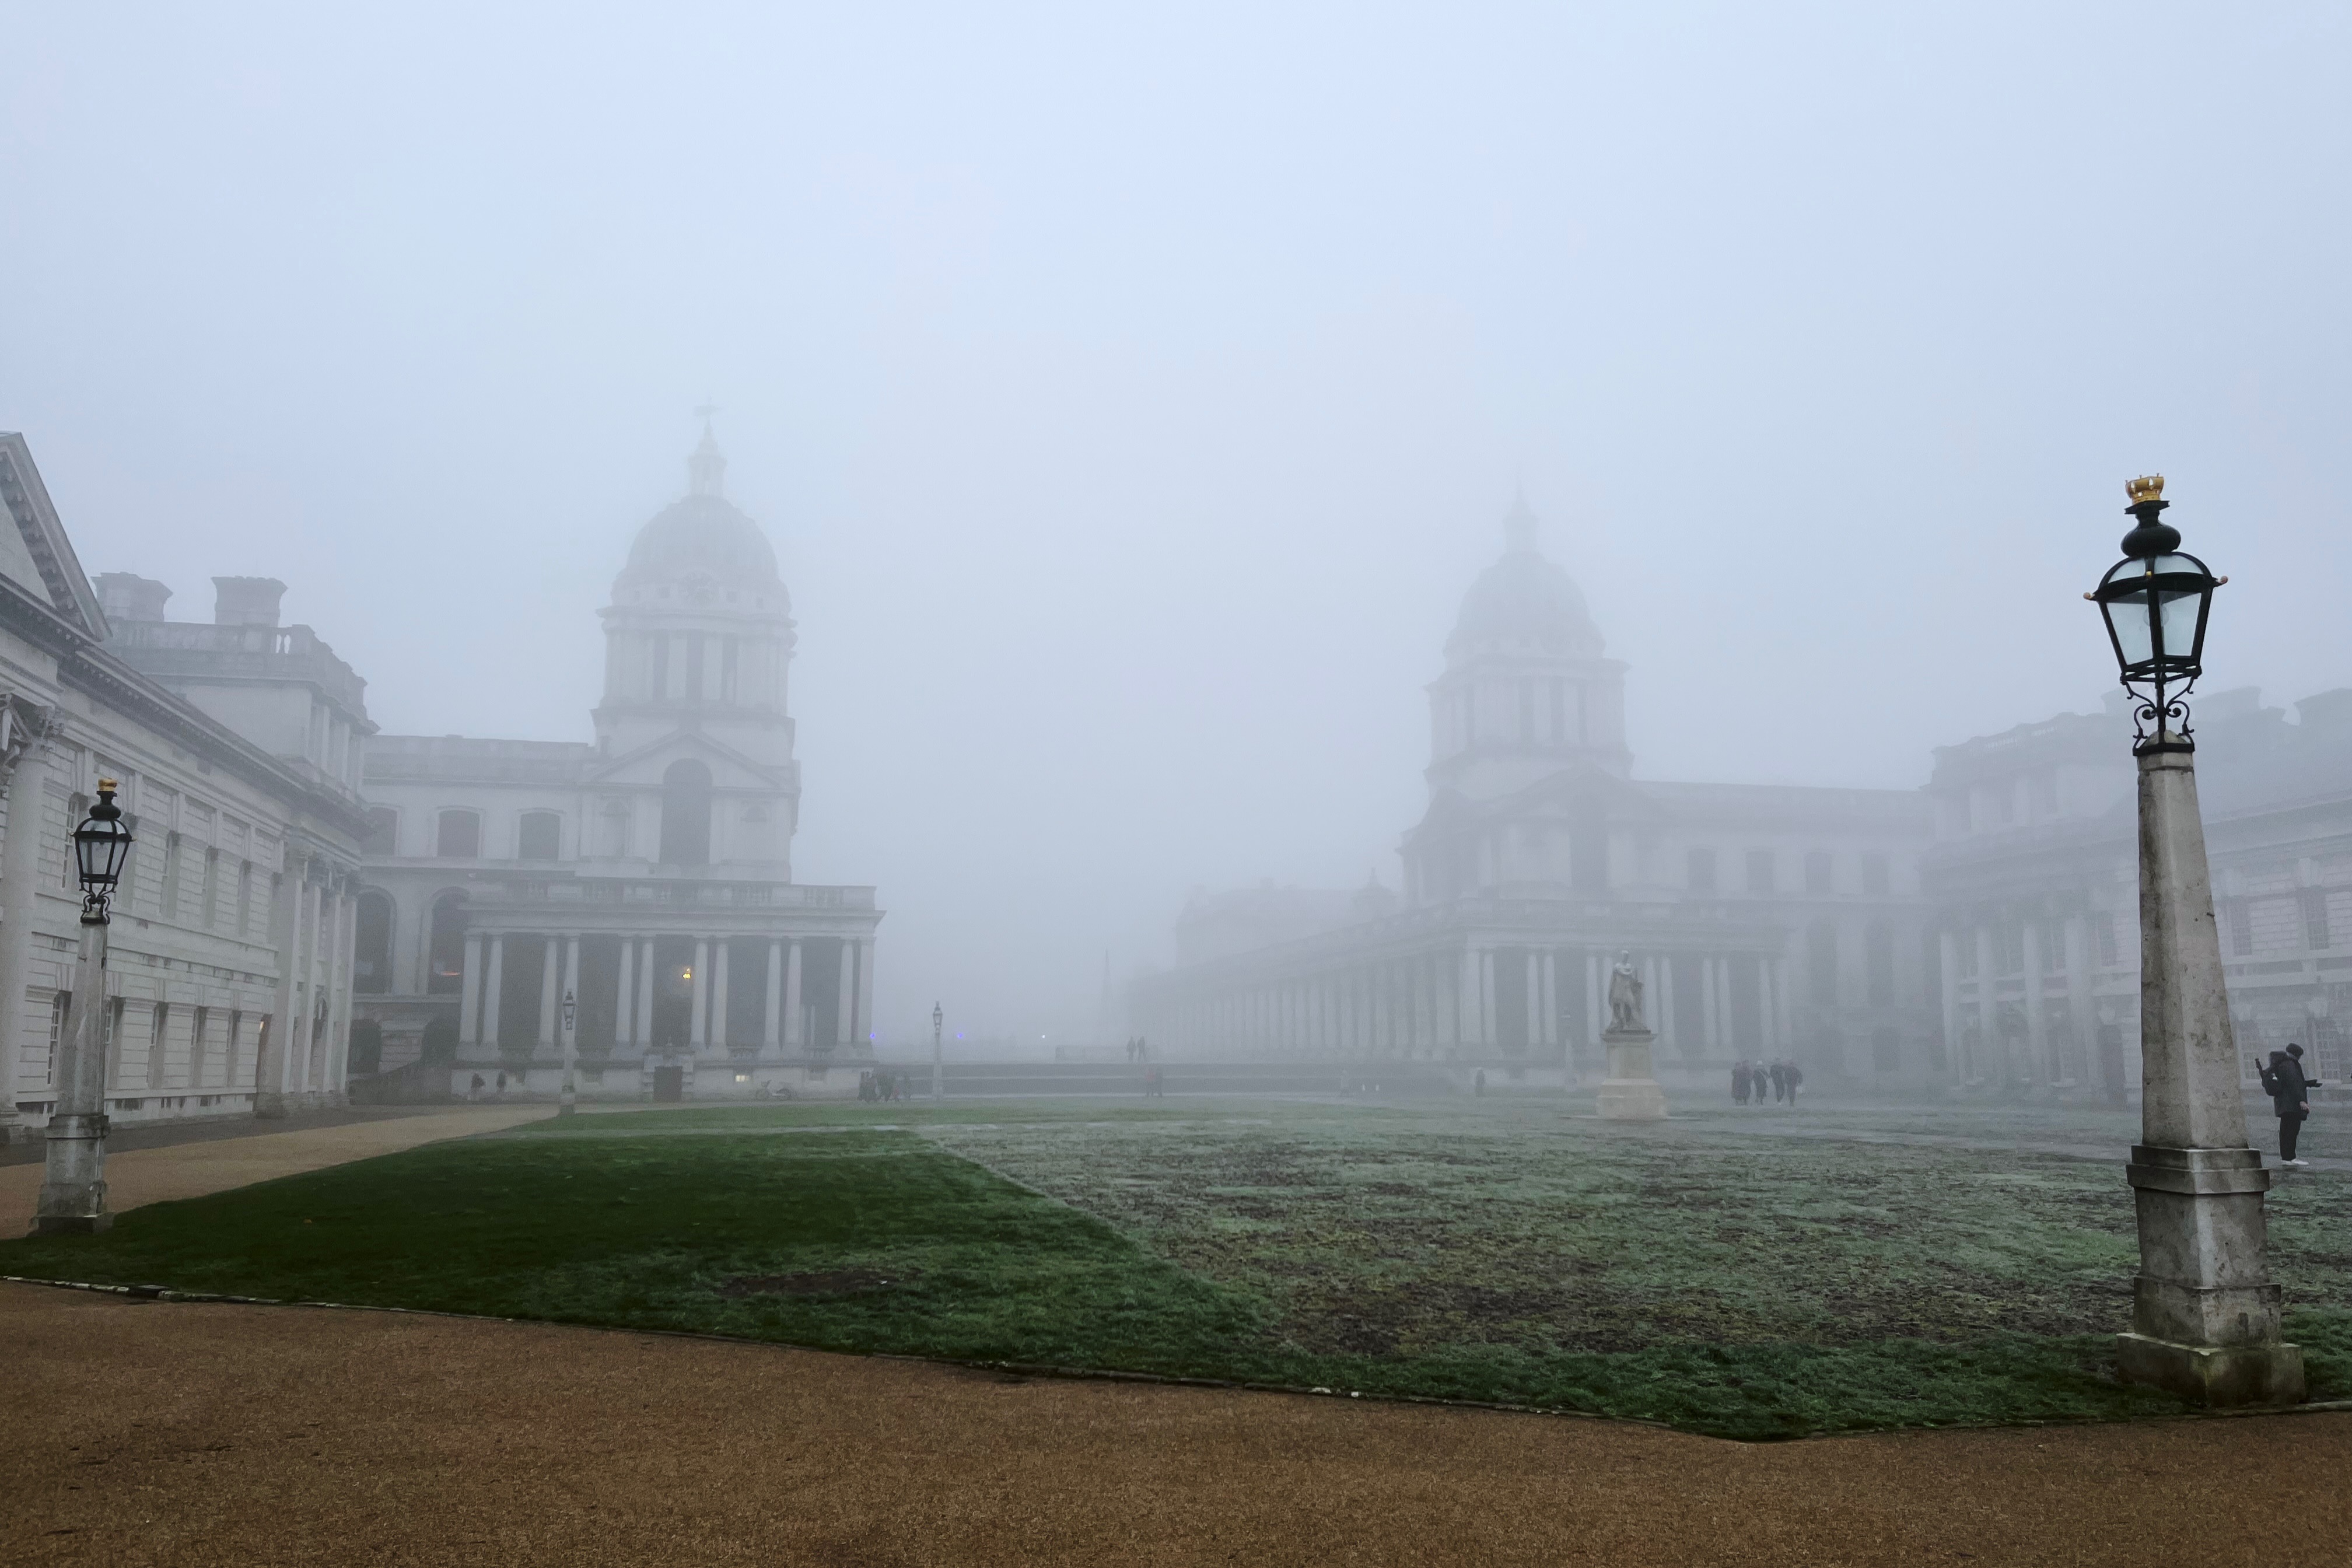 Grand Square of the Old Royal Naval College, Greenwich, in the fog